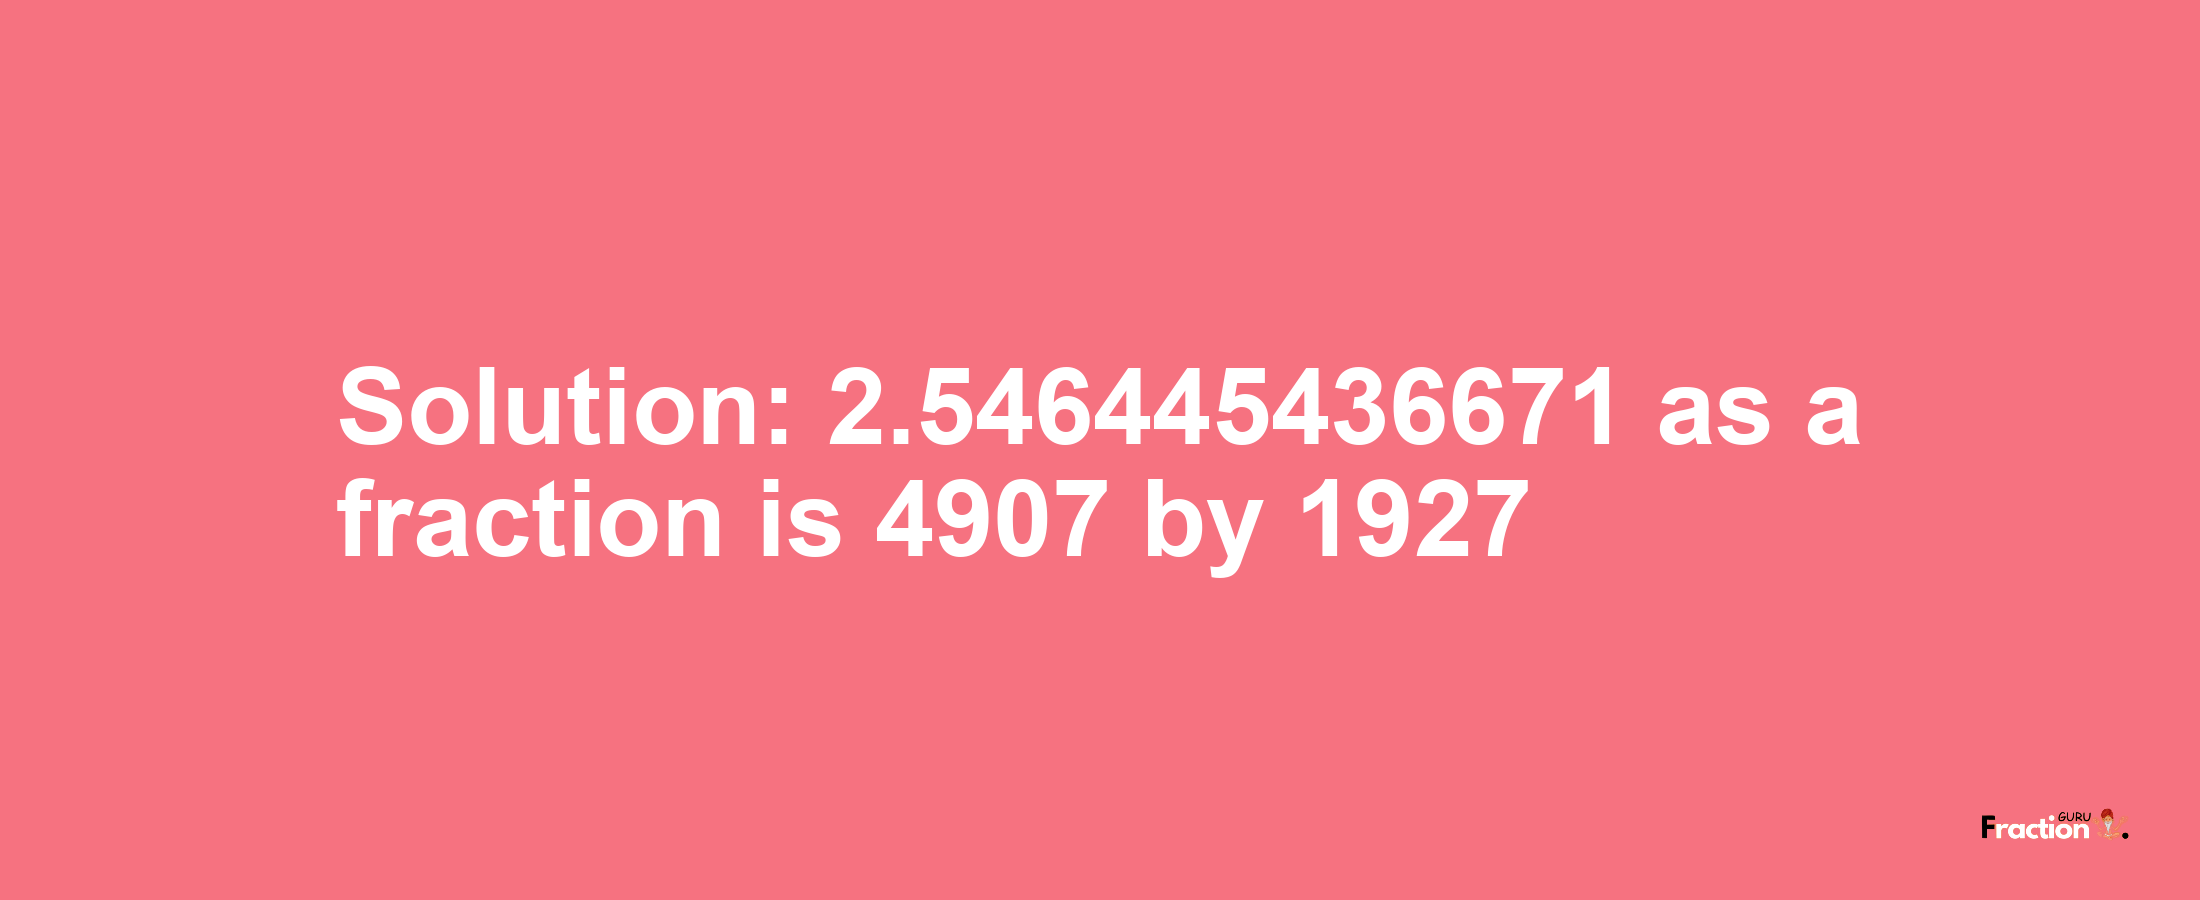 Solution:2.546445436671 as a fraction is 4907/1927